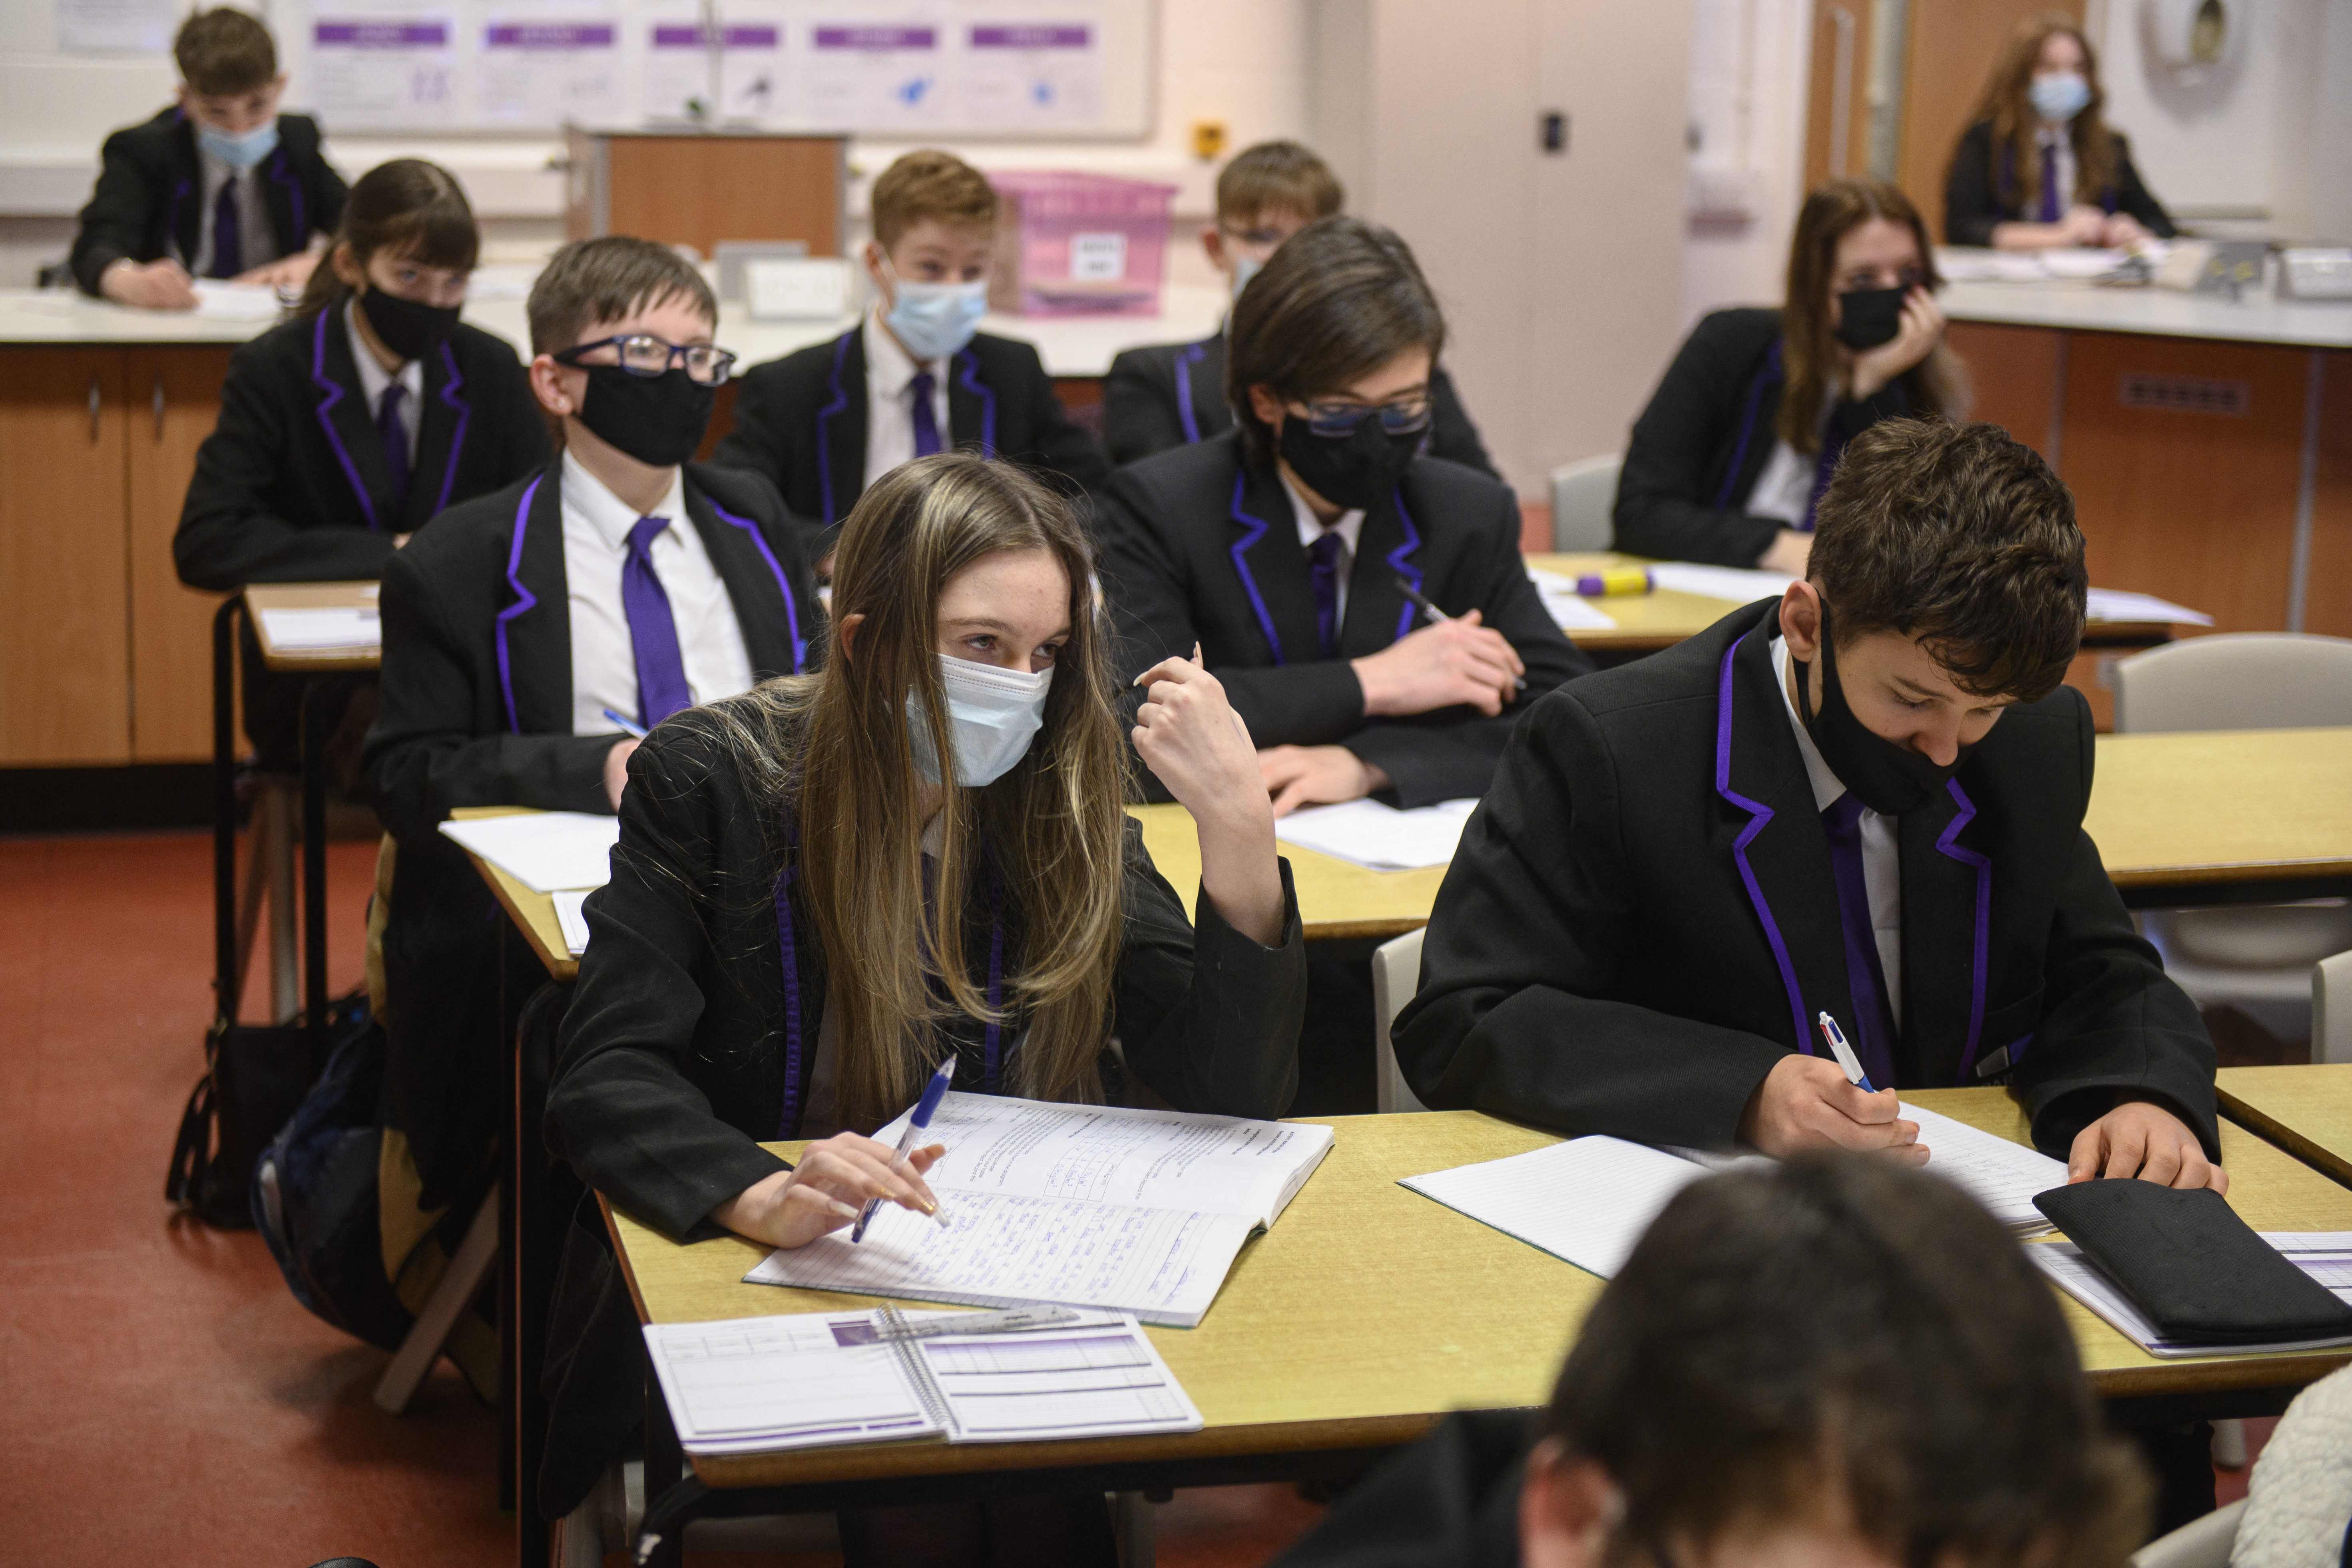 National schools masks requirement ended on Thursday